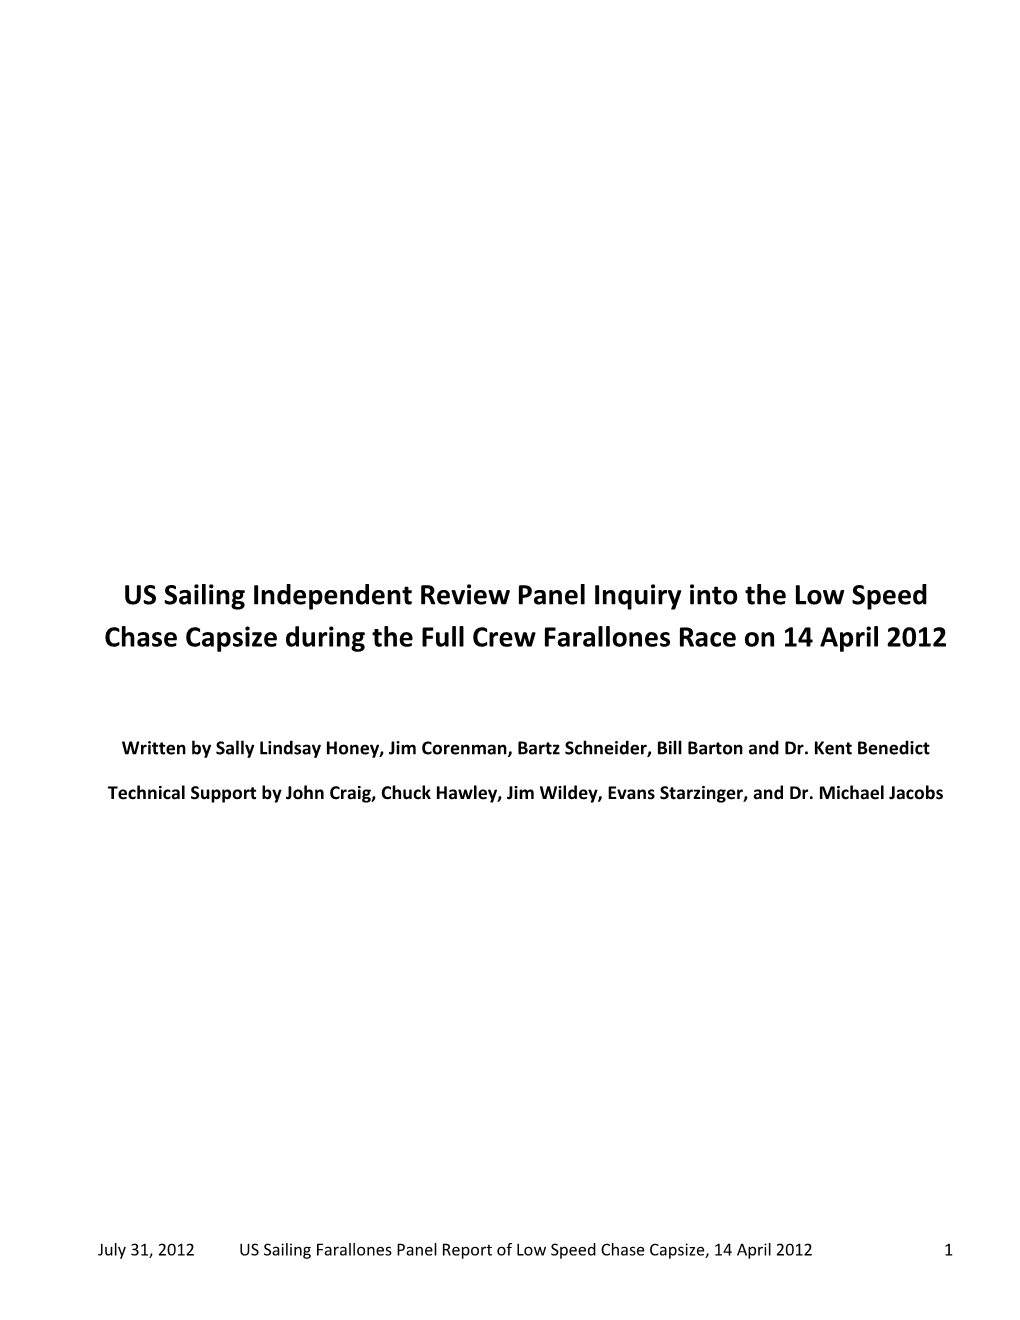 US Sailing Independent Review Panel Inquiry Into the Low Speed Chase Capsize During the Full Crew Farallones Race on 14 April 2012